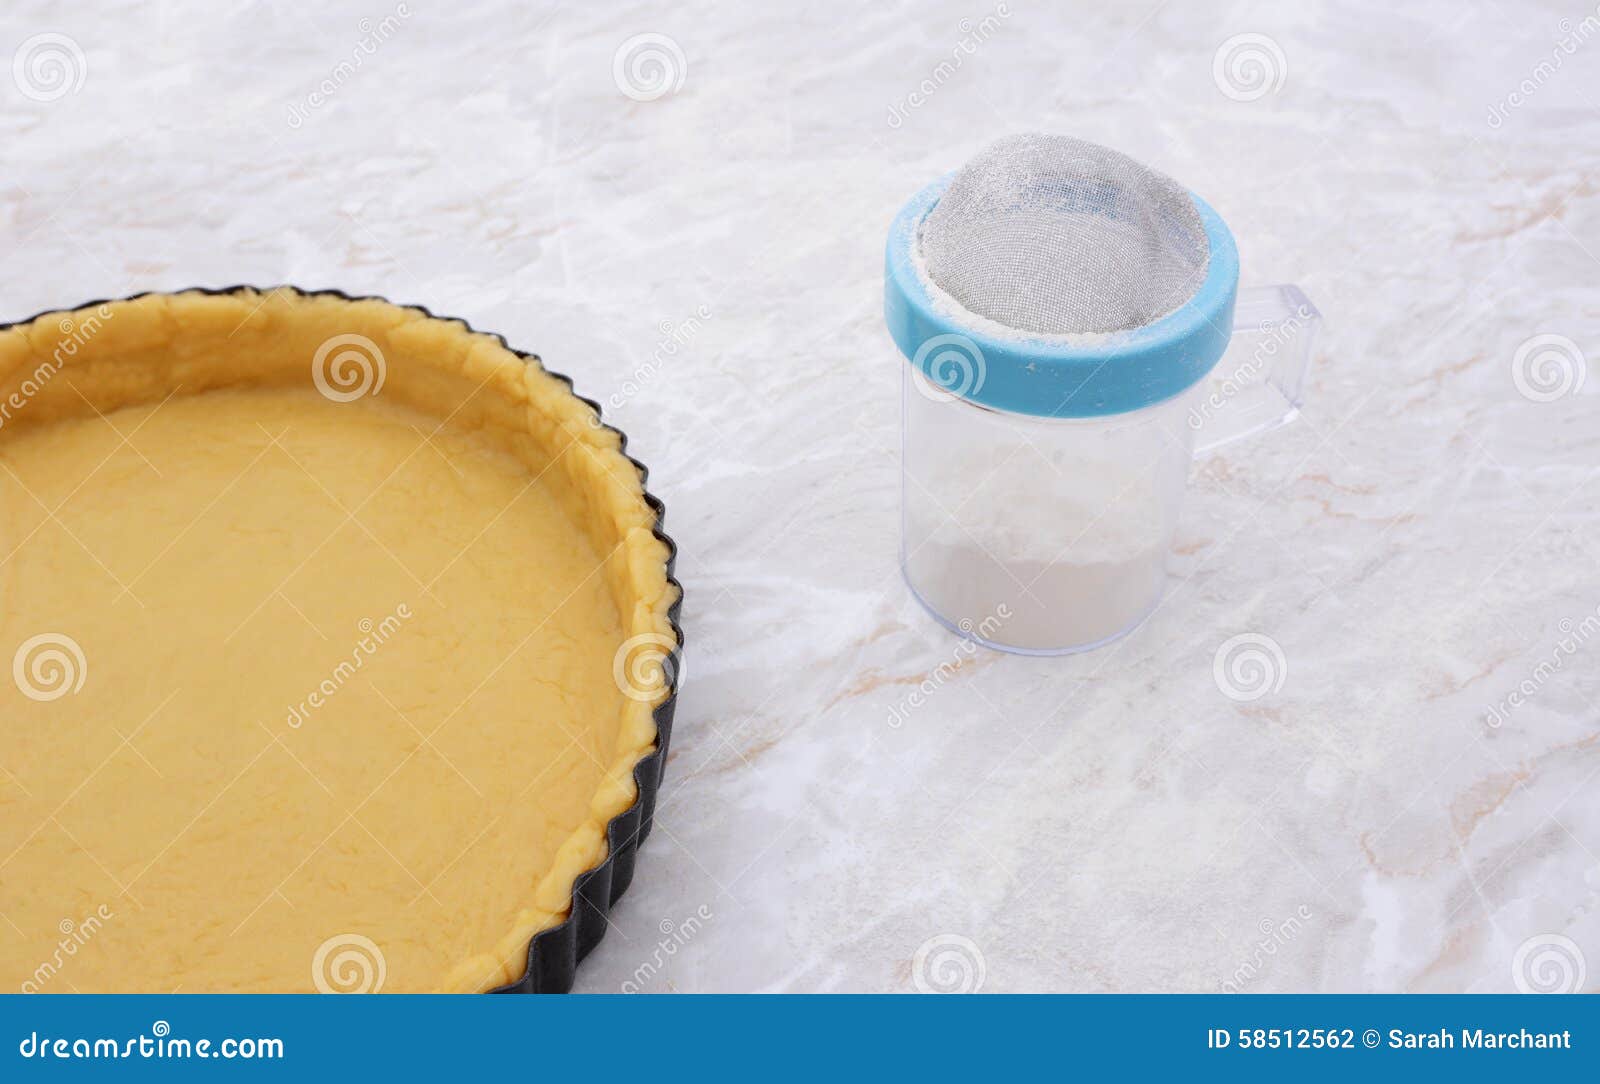 pastry-lined tin and flour drifter